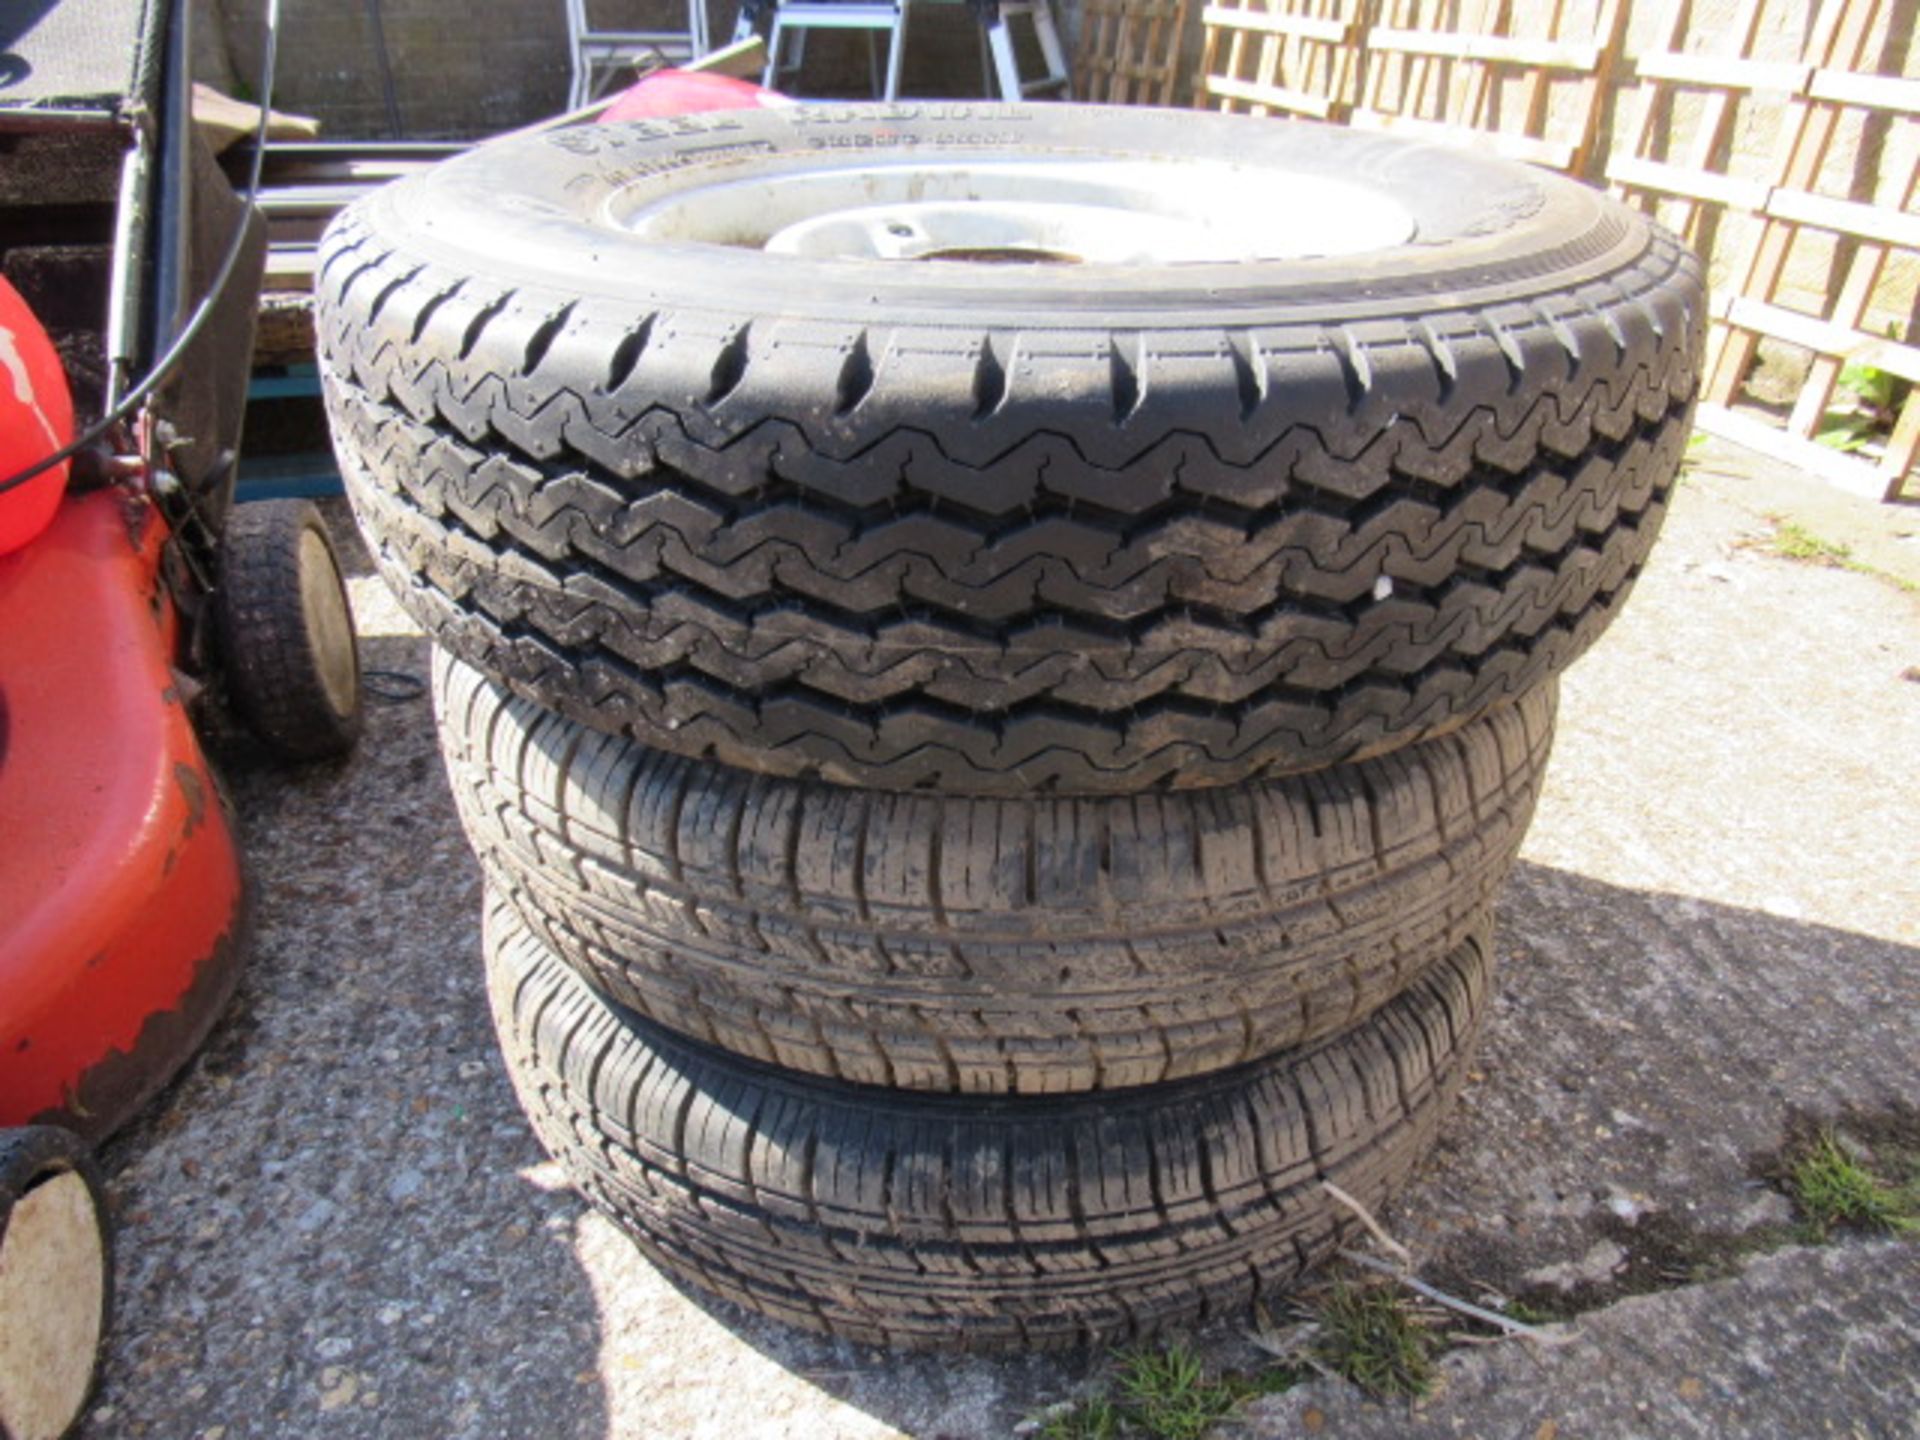 Large yellow linbin of Ford Mondeo lights, and 3 trailer wheel and tyres: 175R13C; 155R13C; 155R13C